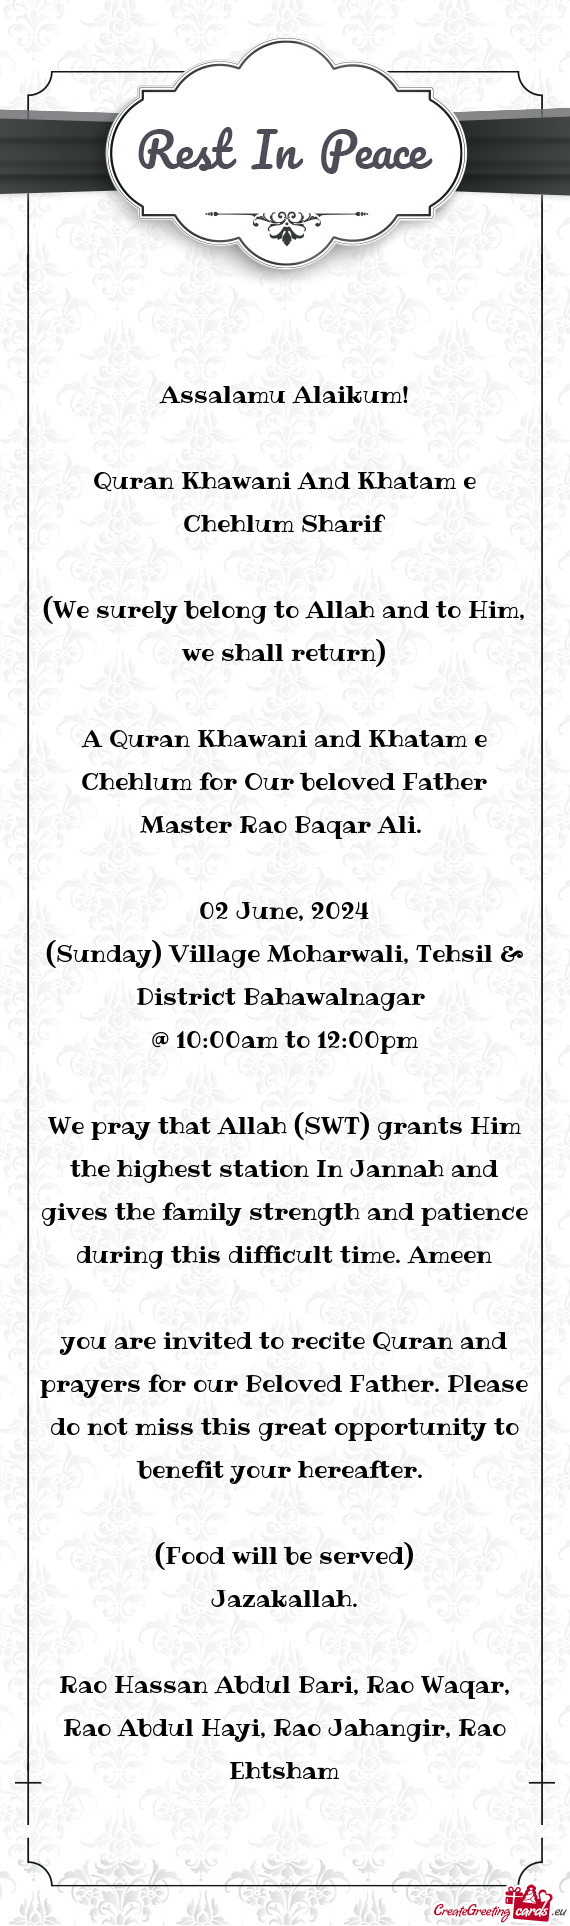 We pray that Allah (SWT) grants Him the highest station In Jannah and gives the family strength and